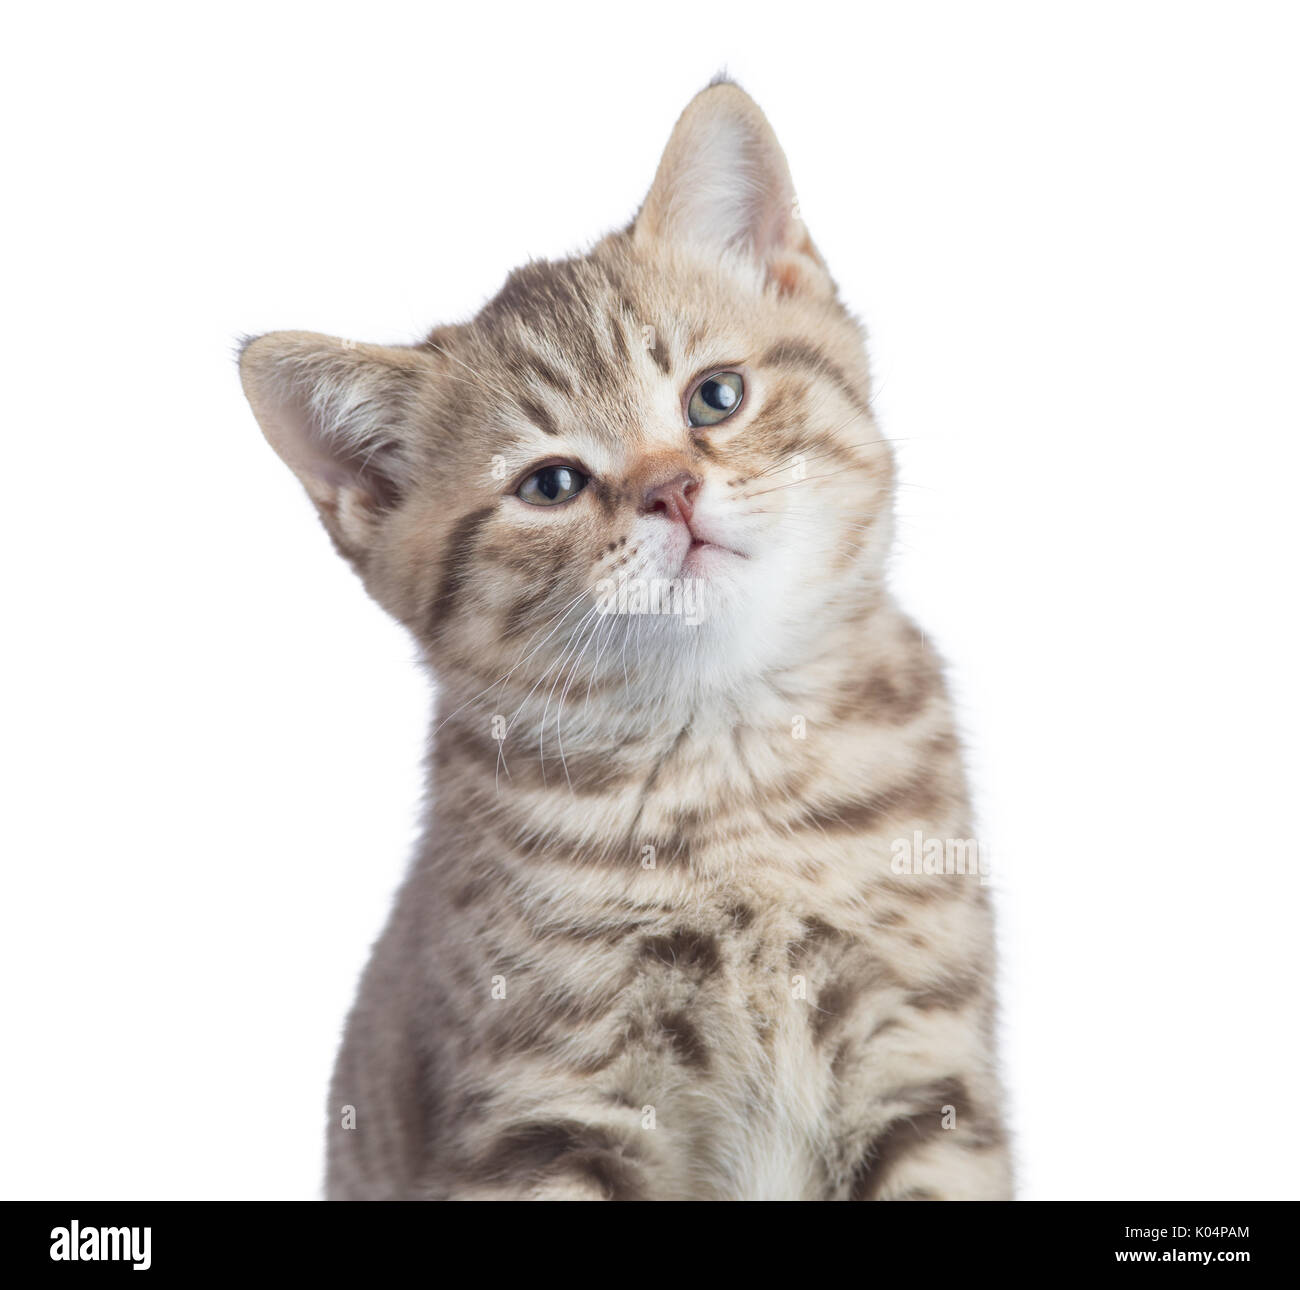 Satisfied funny cat portrait isolated Stock Photo